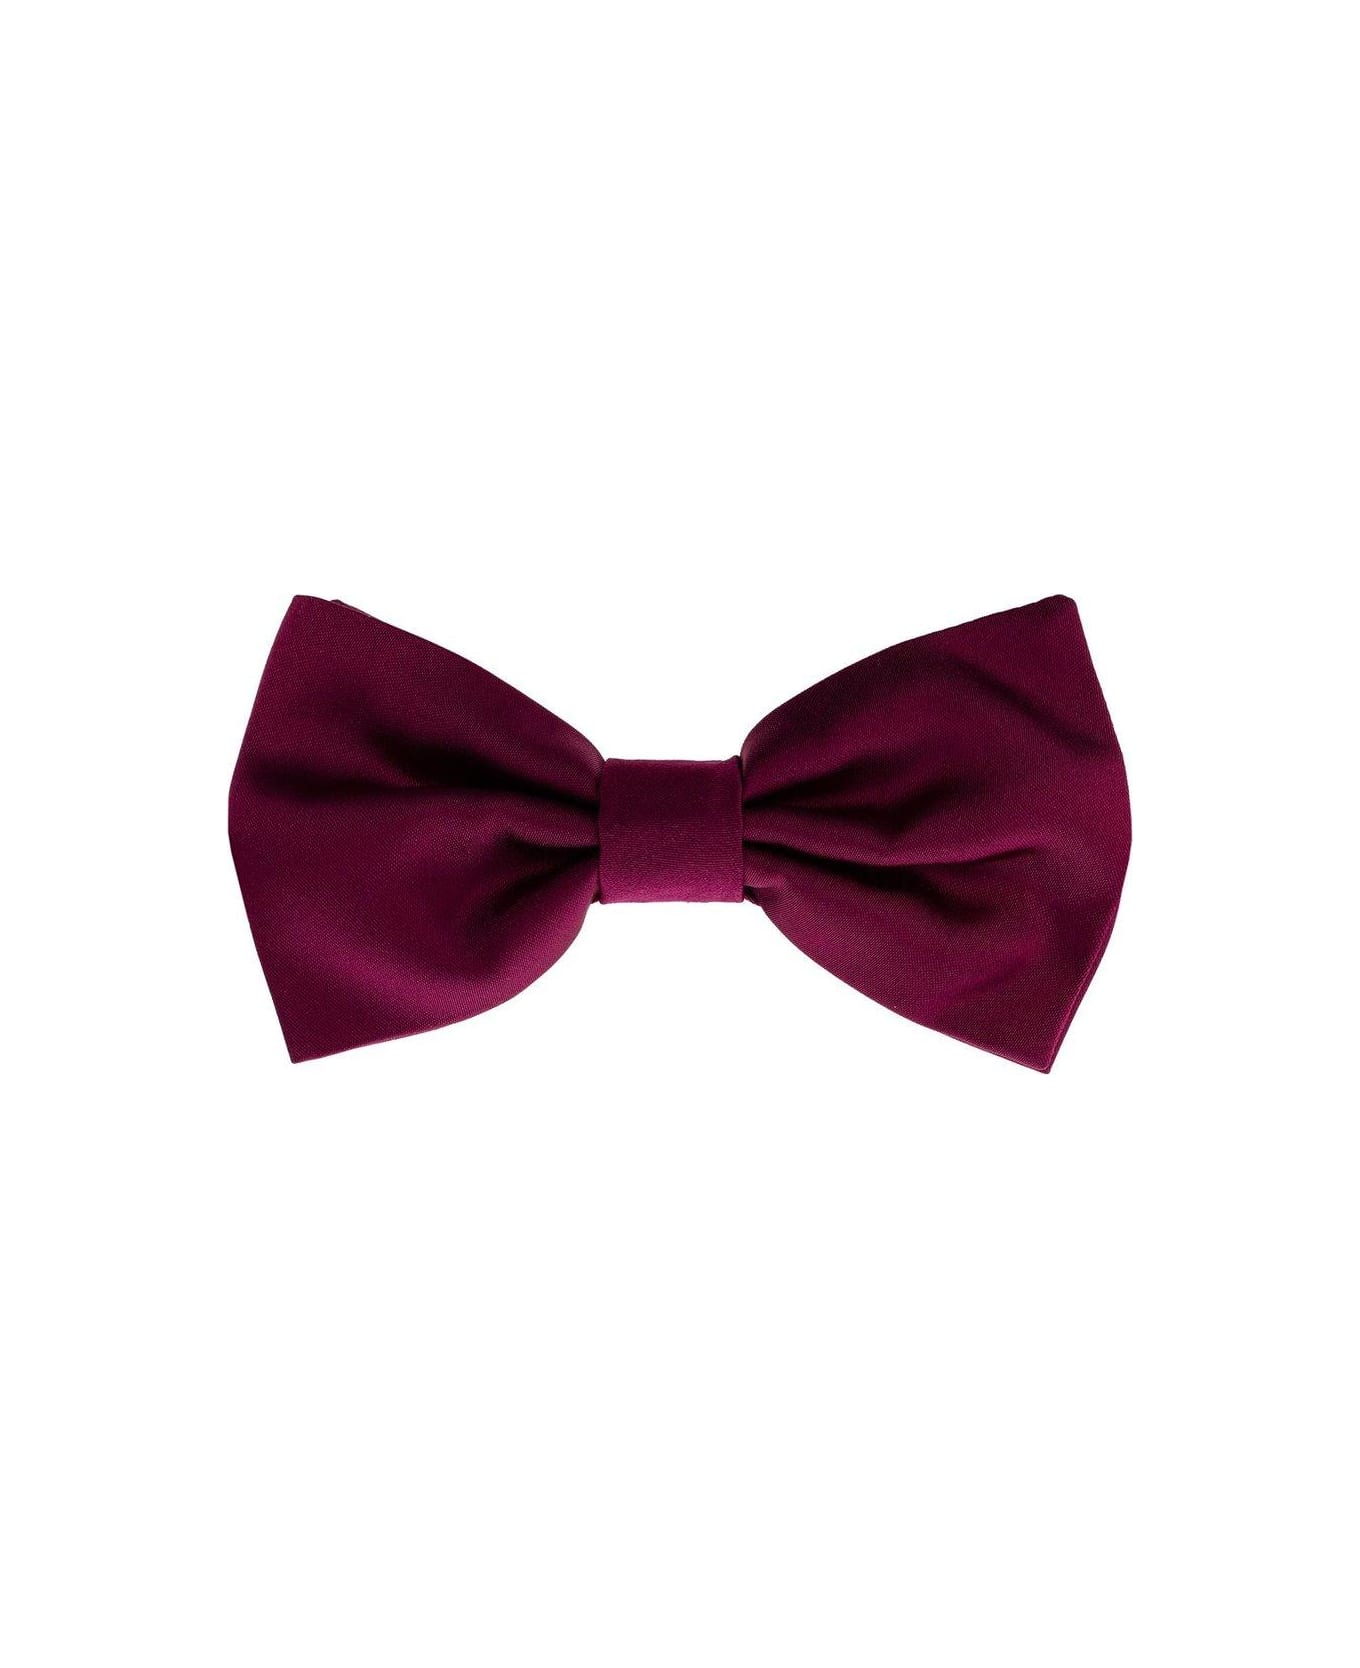 Dolce & Gabbana Bow Tie - Red ネクタイ